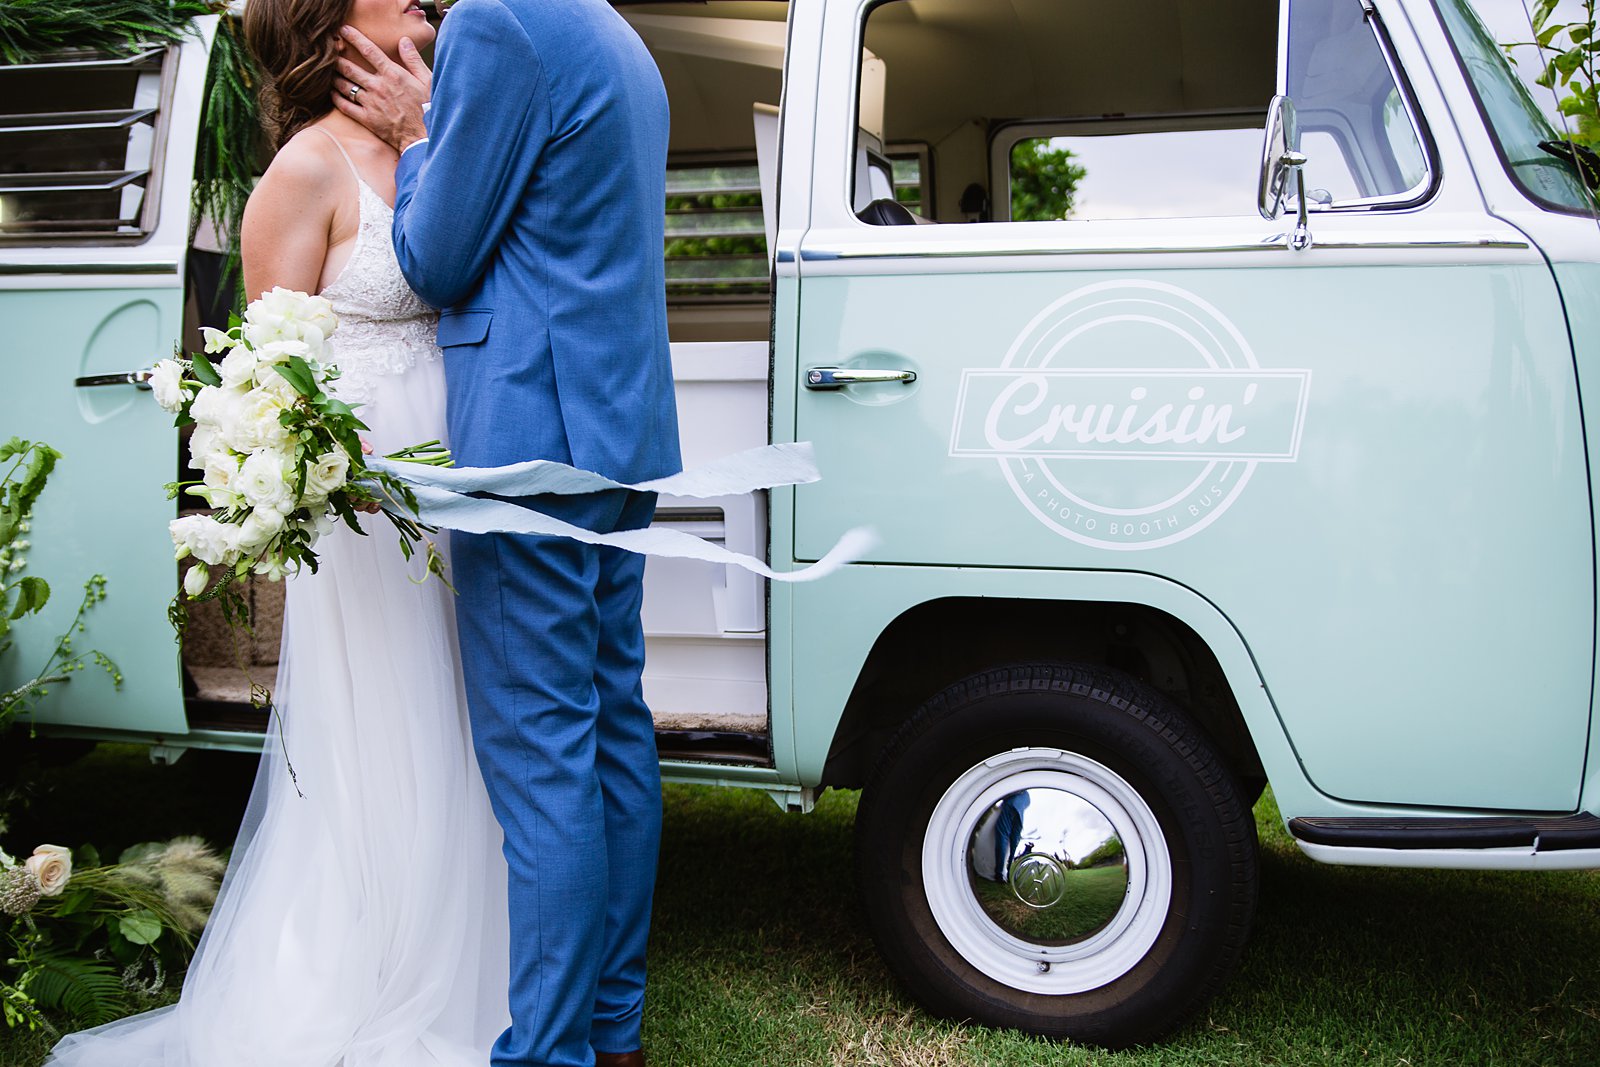 Bride and groom together with VW Cruisin' Photo Booth Bus booth at Gather Estate wedding by Arizona wedding photographers PMA Photography.